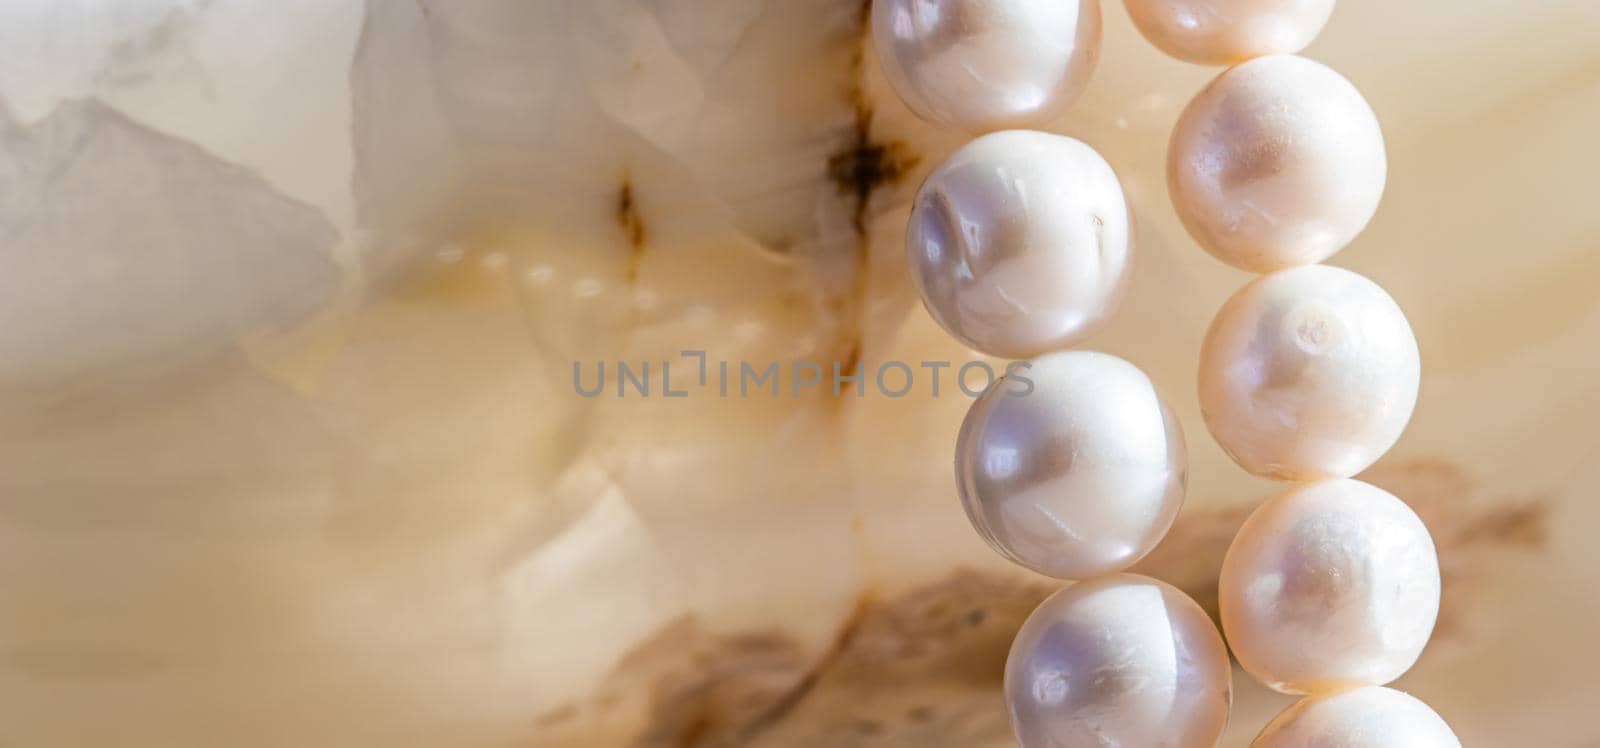 Nature white string of pearls on marble background in soft focus, with highlights.